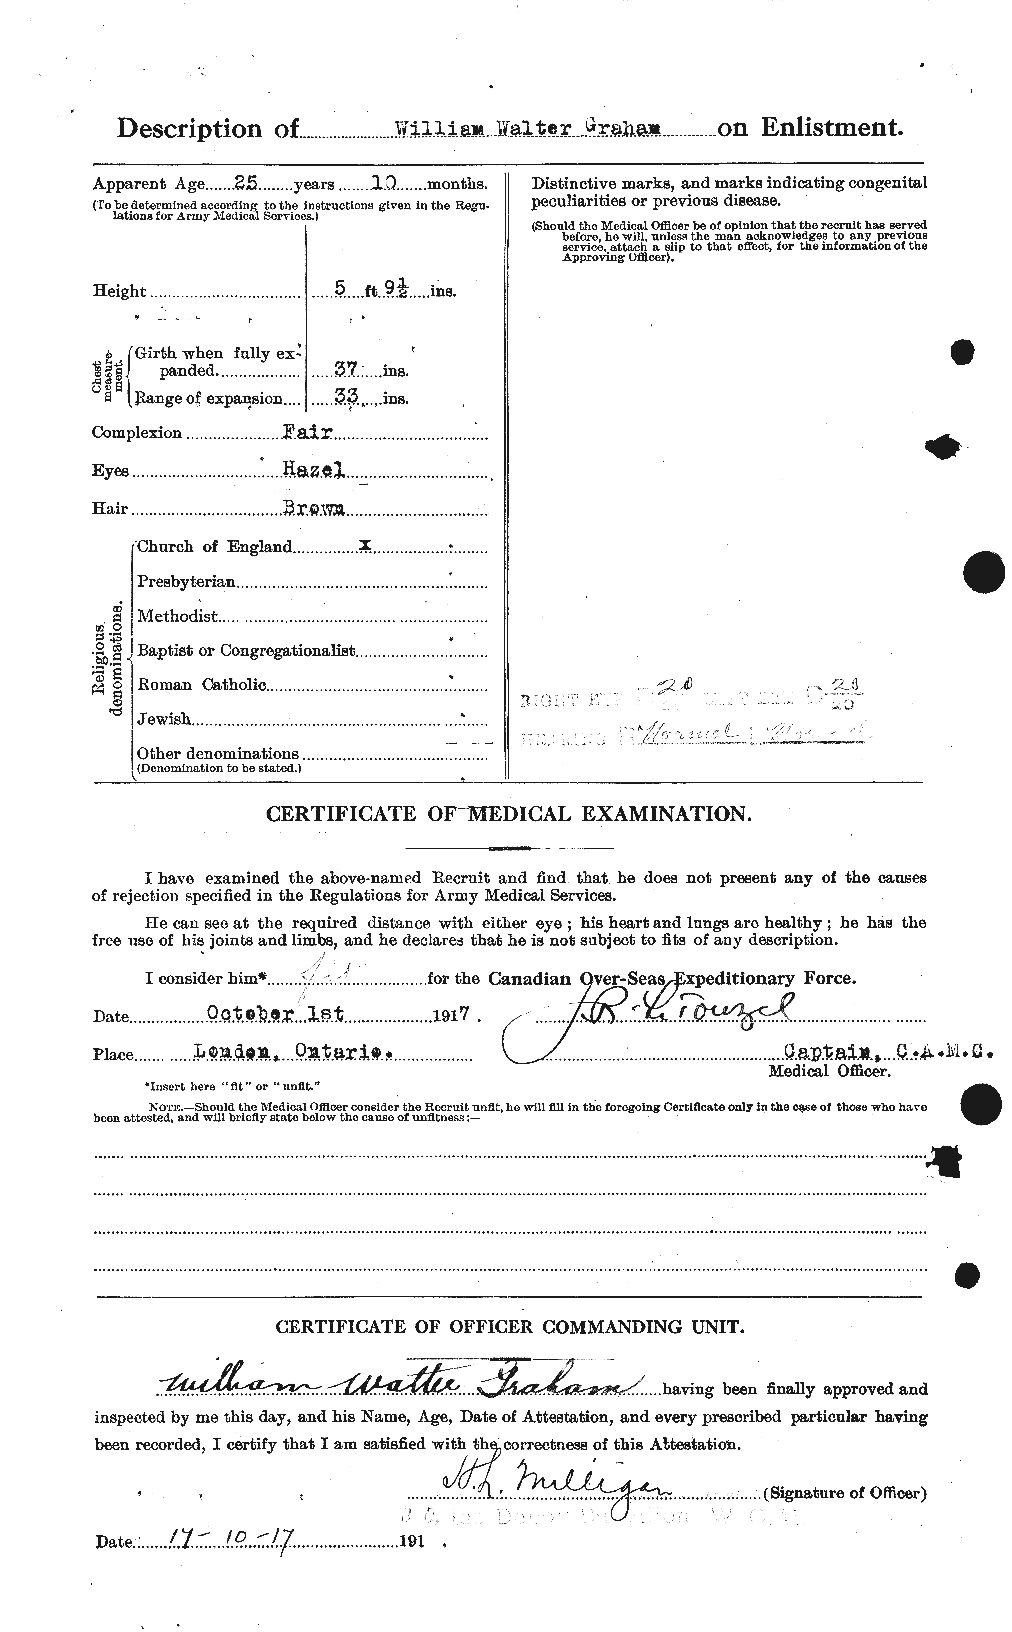 Personnel Records of the First World War - CEF 358047b